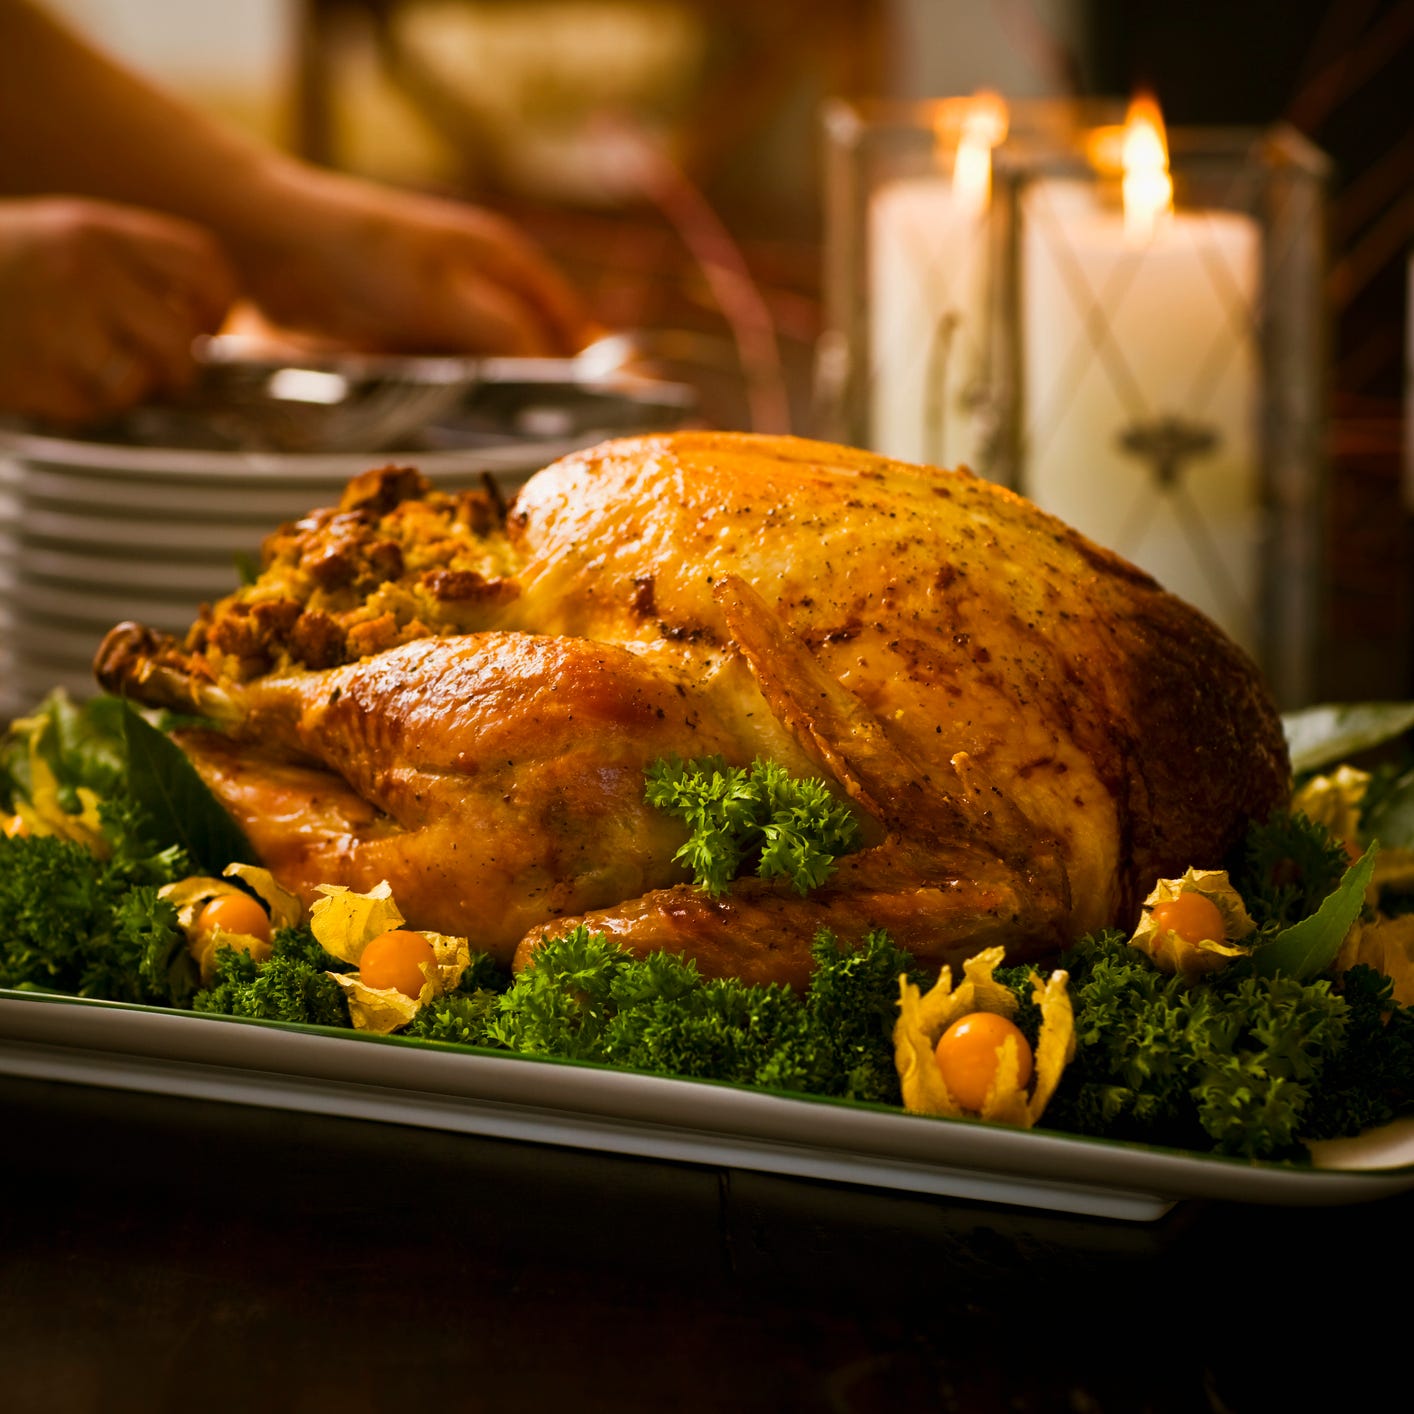 Fly out as early as you can on Thanksgiving Day and you won't miss a minute of the feast or the football game.